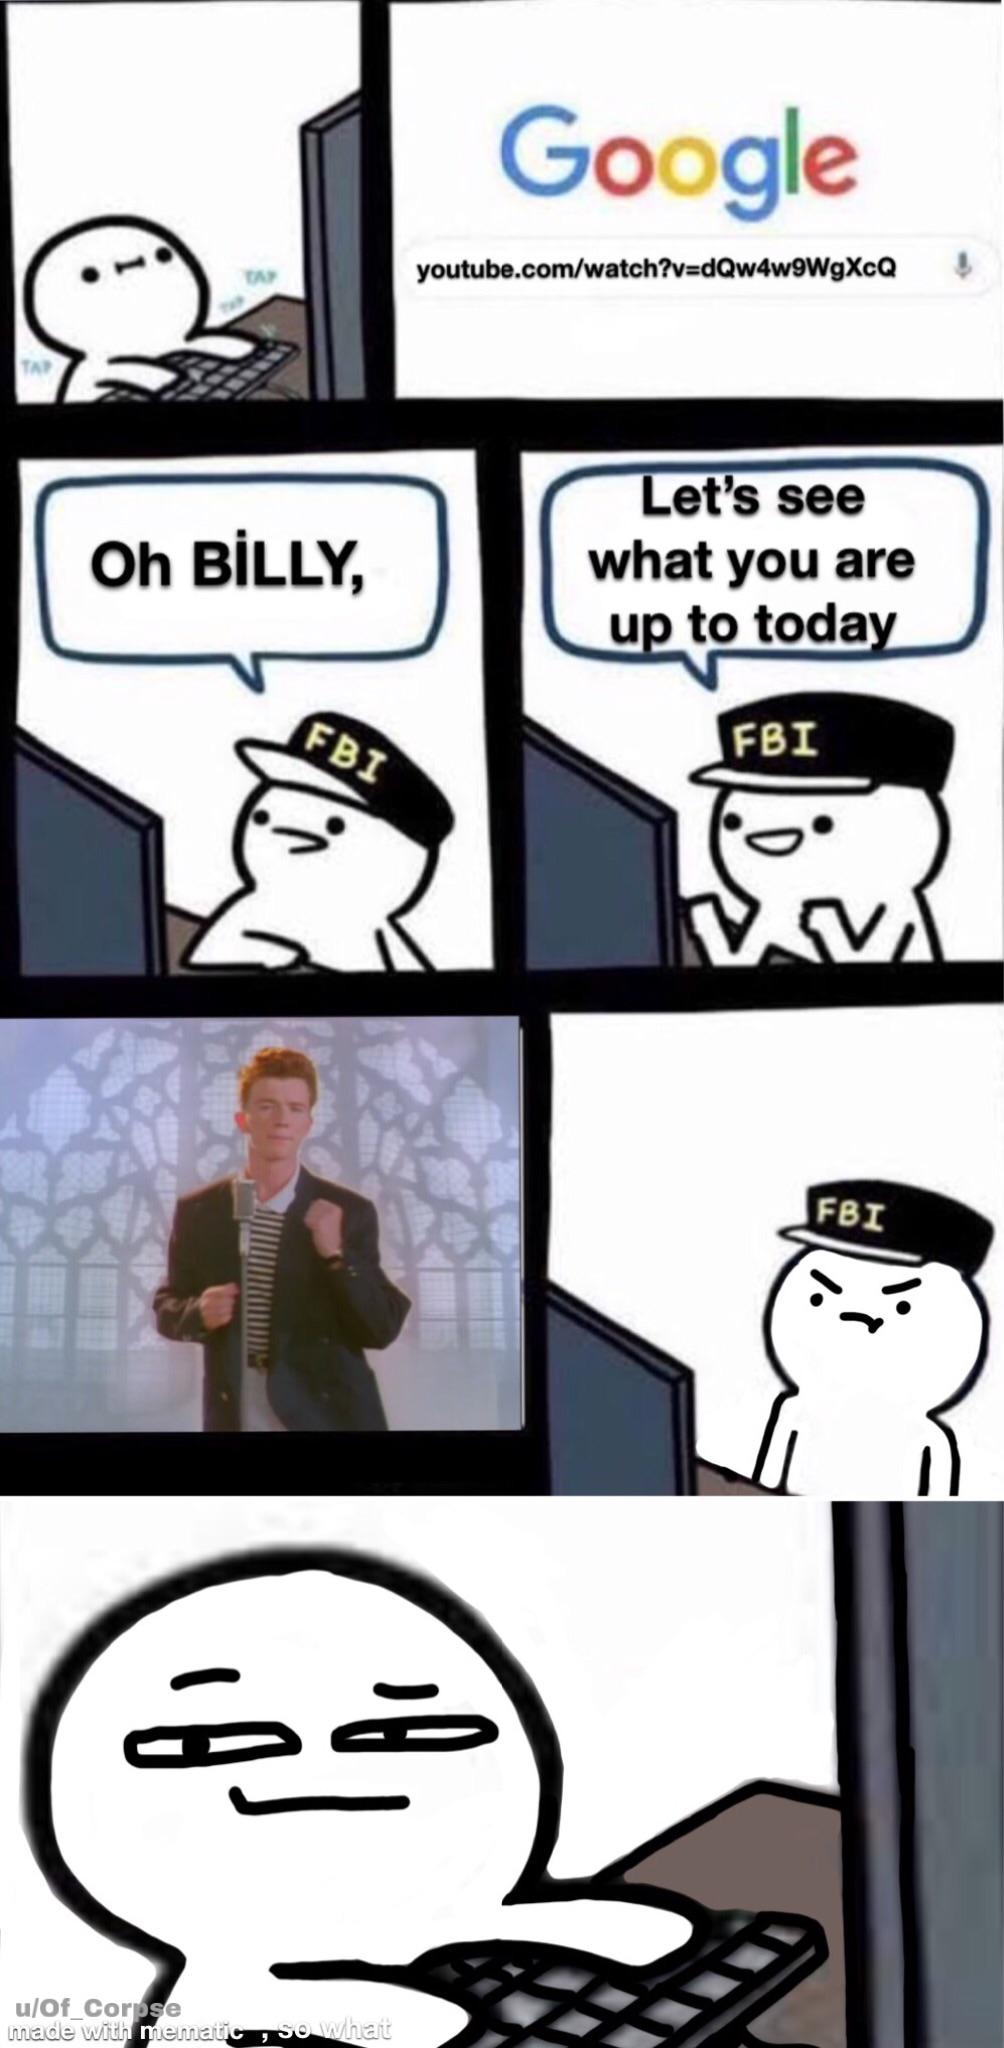 billy meme - Google youtube.comwatch?vdQw4w9WgXcQ Oh Blly Let's see what you are up to today Fbi Fbi V Fbi ei uOf_Corpse made with mematic ,so what